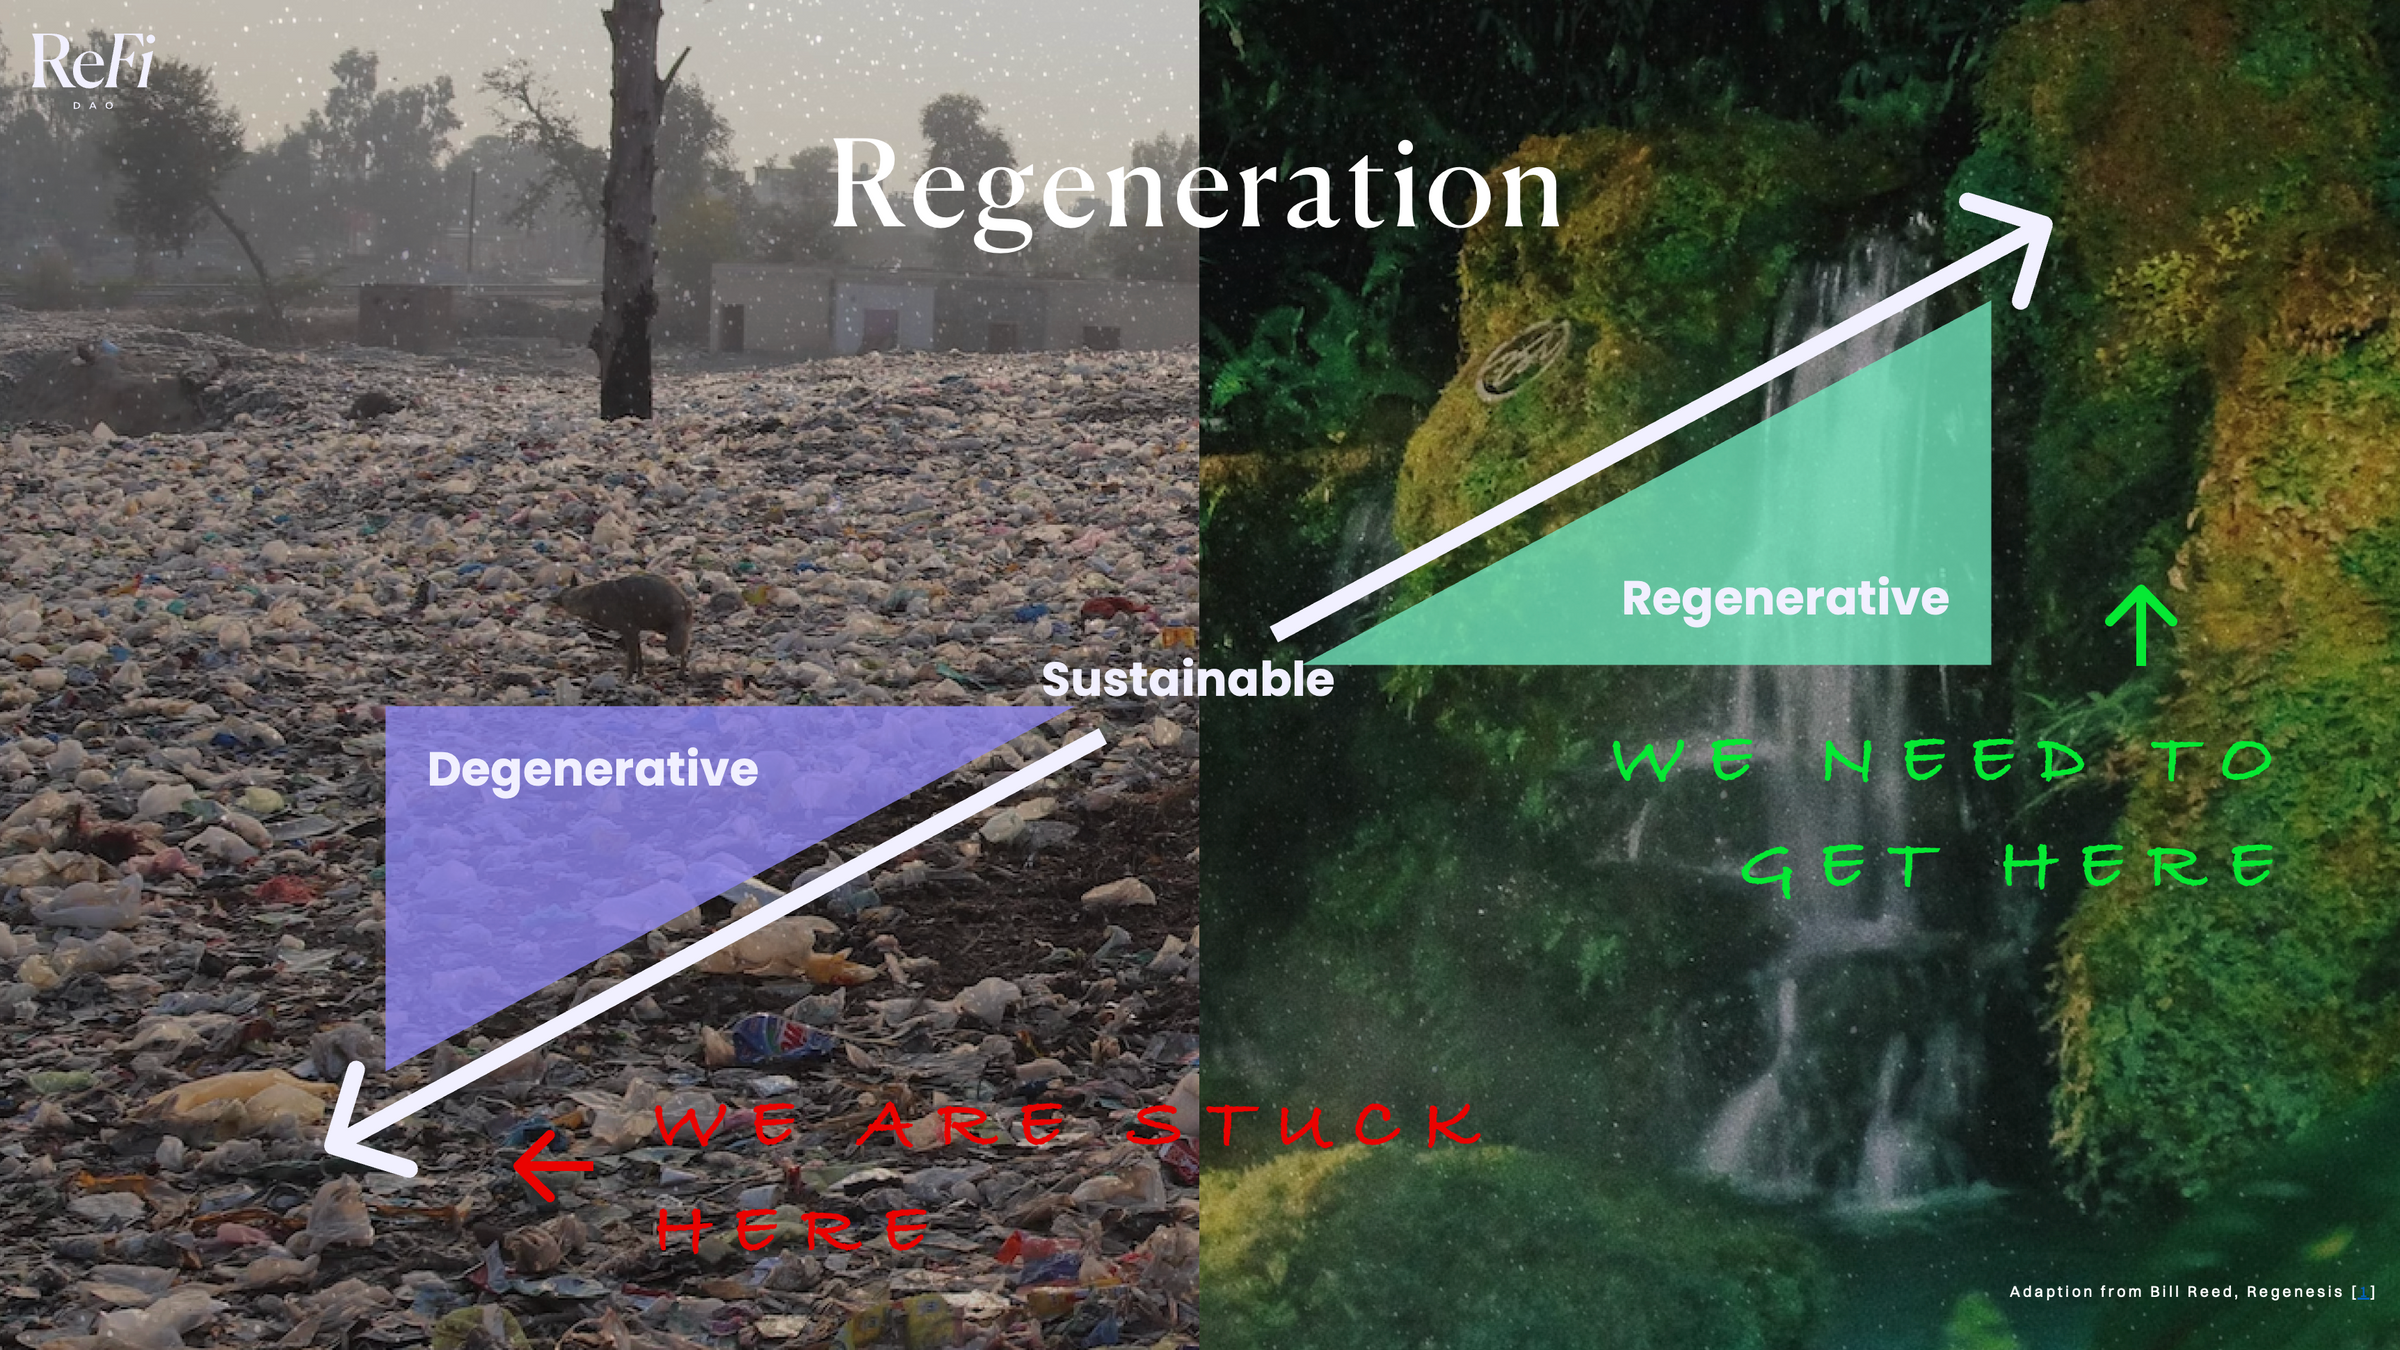 Adapted from Bill Reed (2007) - Shifting from ‘sustainability’ to regeneration